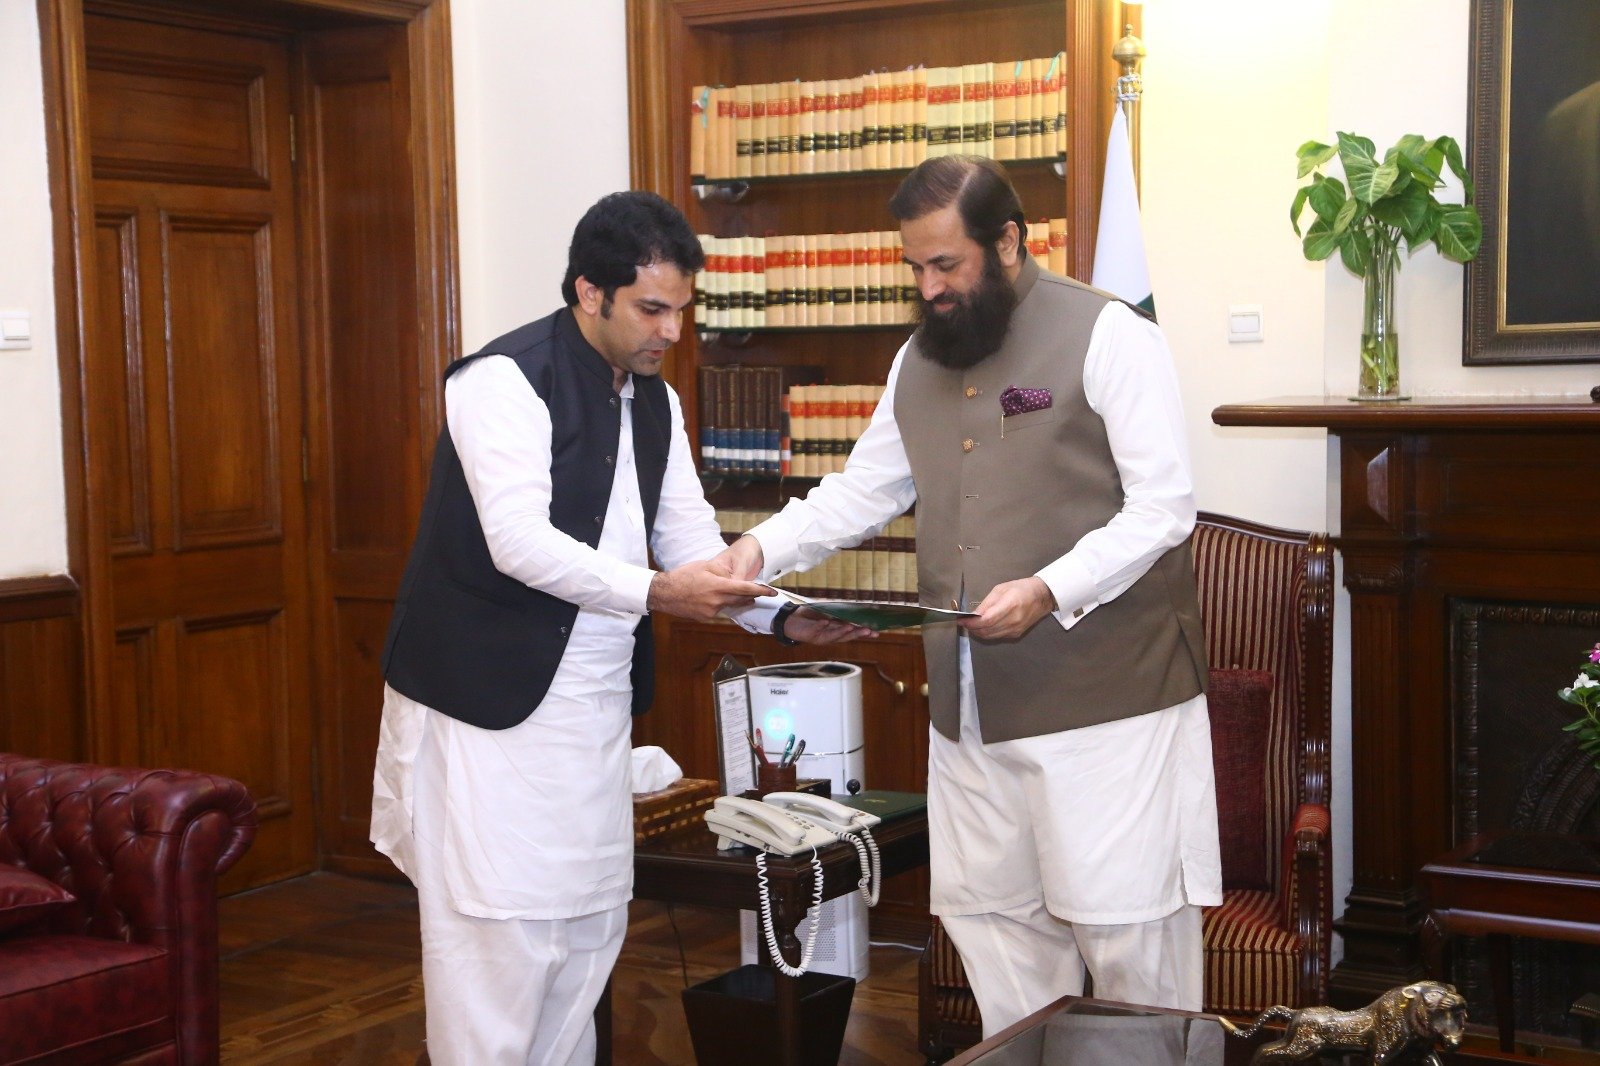 Mr. Sikander Ishfaq Razi #President #GtCCI along with Mr. Haji Nasir Mehmood #Group #leader #Shaheen Group and Mr. Waqar Ayub #Chairman Standing Committee visa letter met with Mr. Baligh Ur Rehman #Governor #Punjab at Governor House.